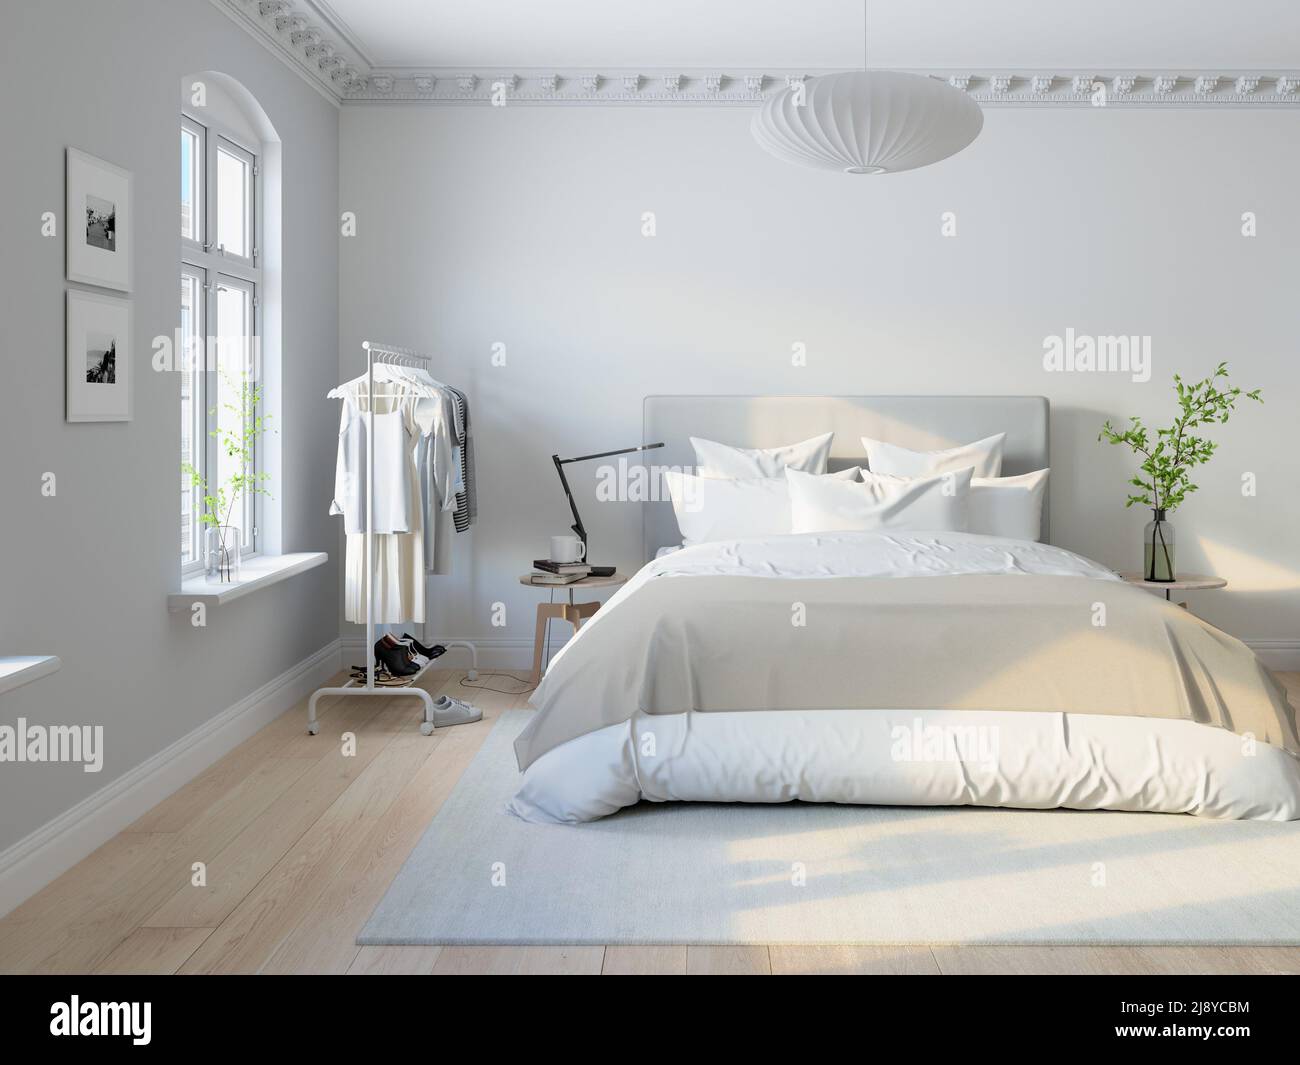 3d illustration. scandinavian style bedroom with wall prints. Stock Photo